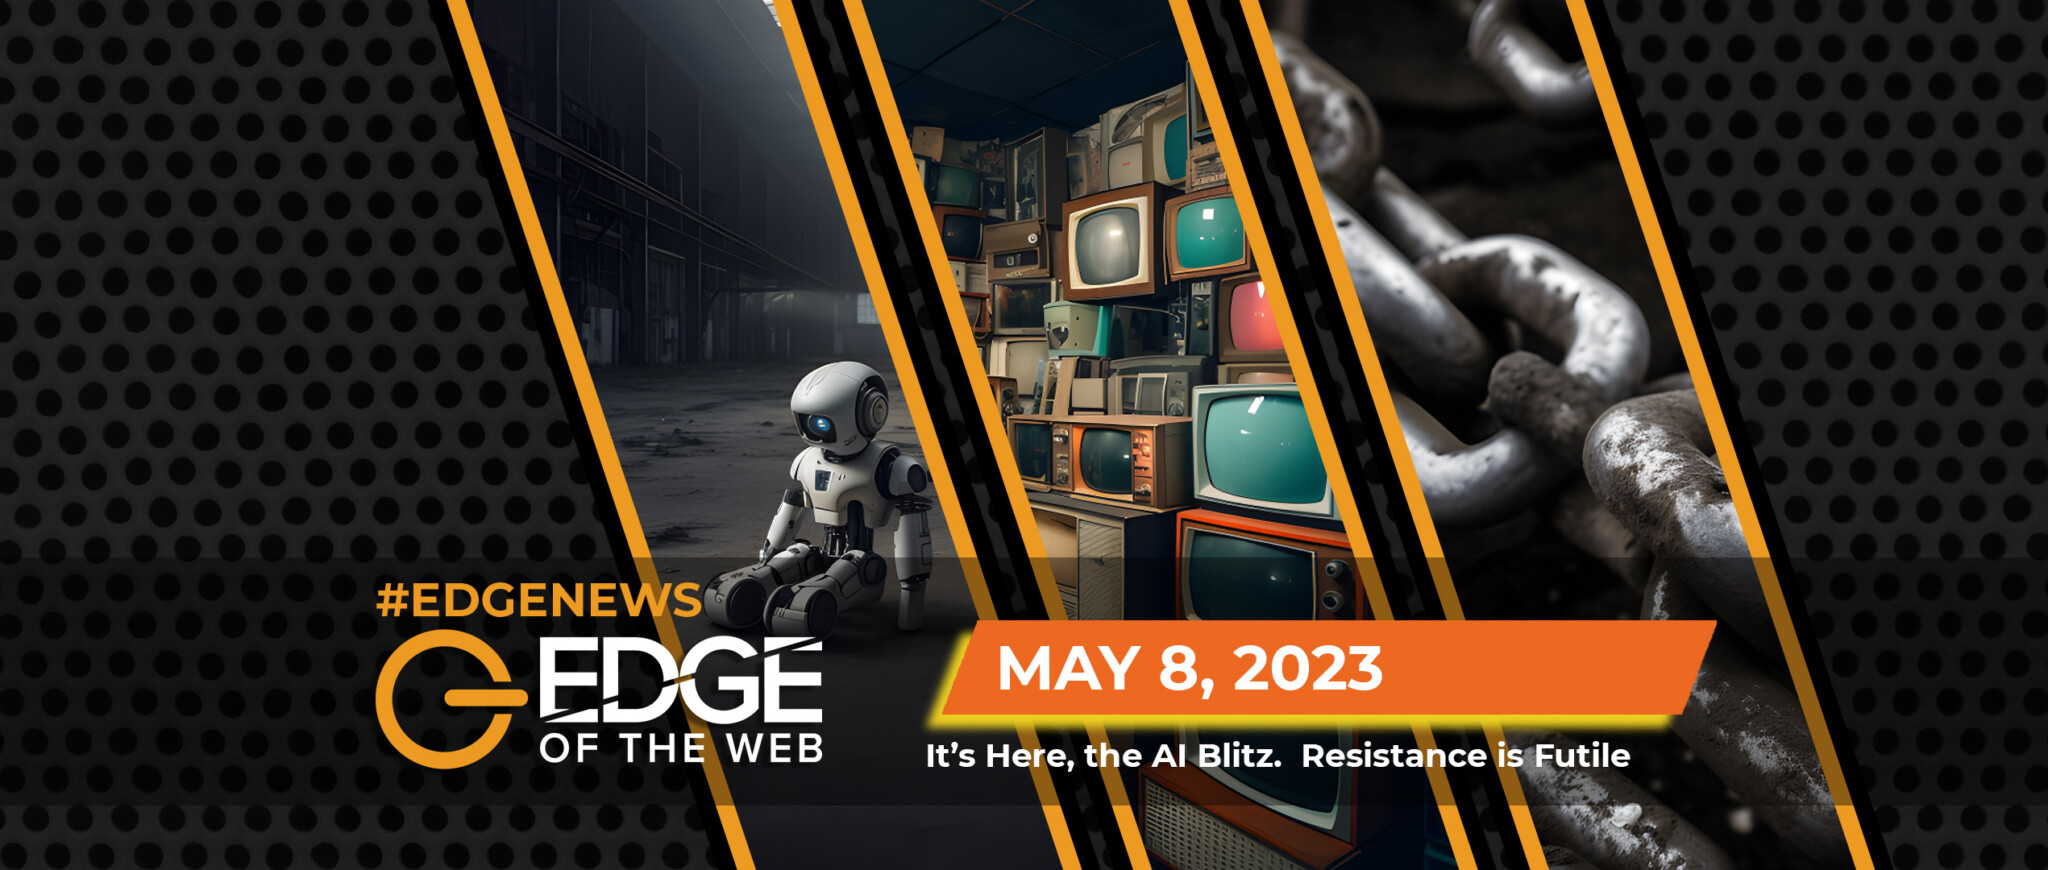 591 | News from the EDGE | Week of 5.8.2023